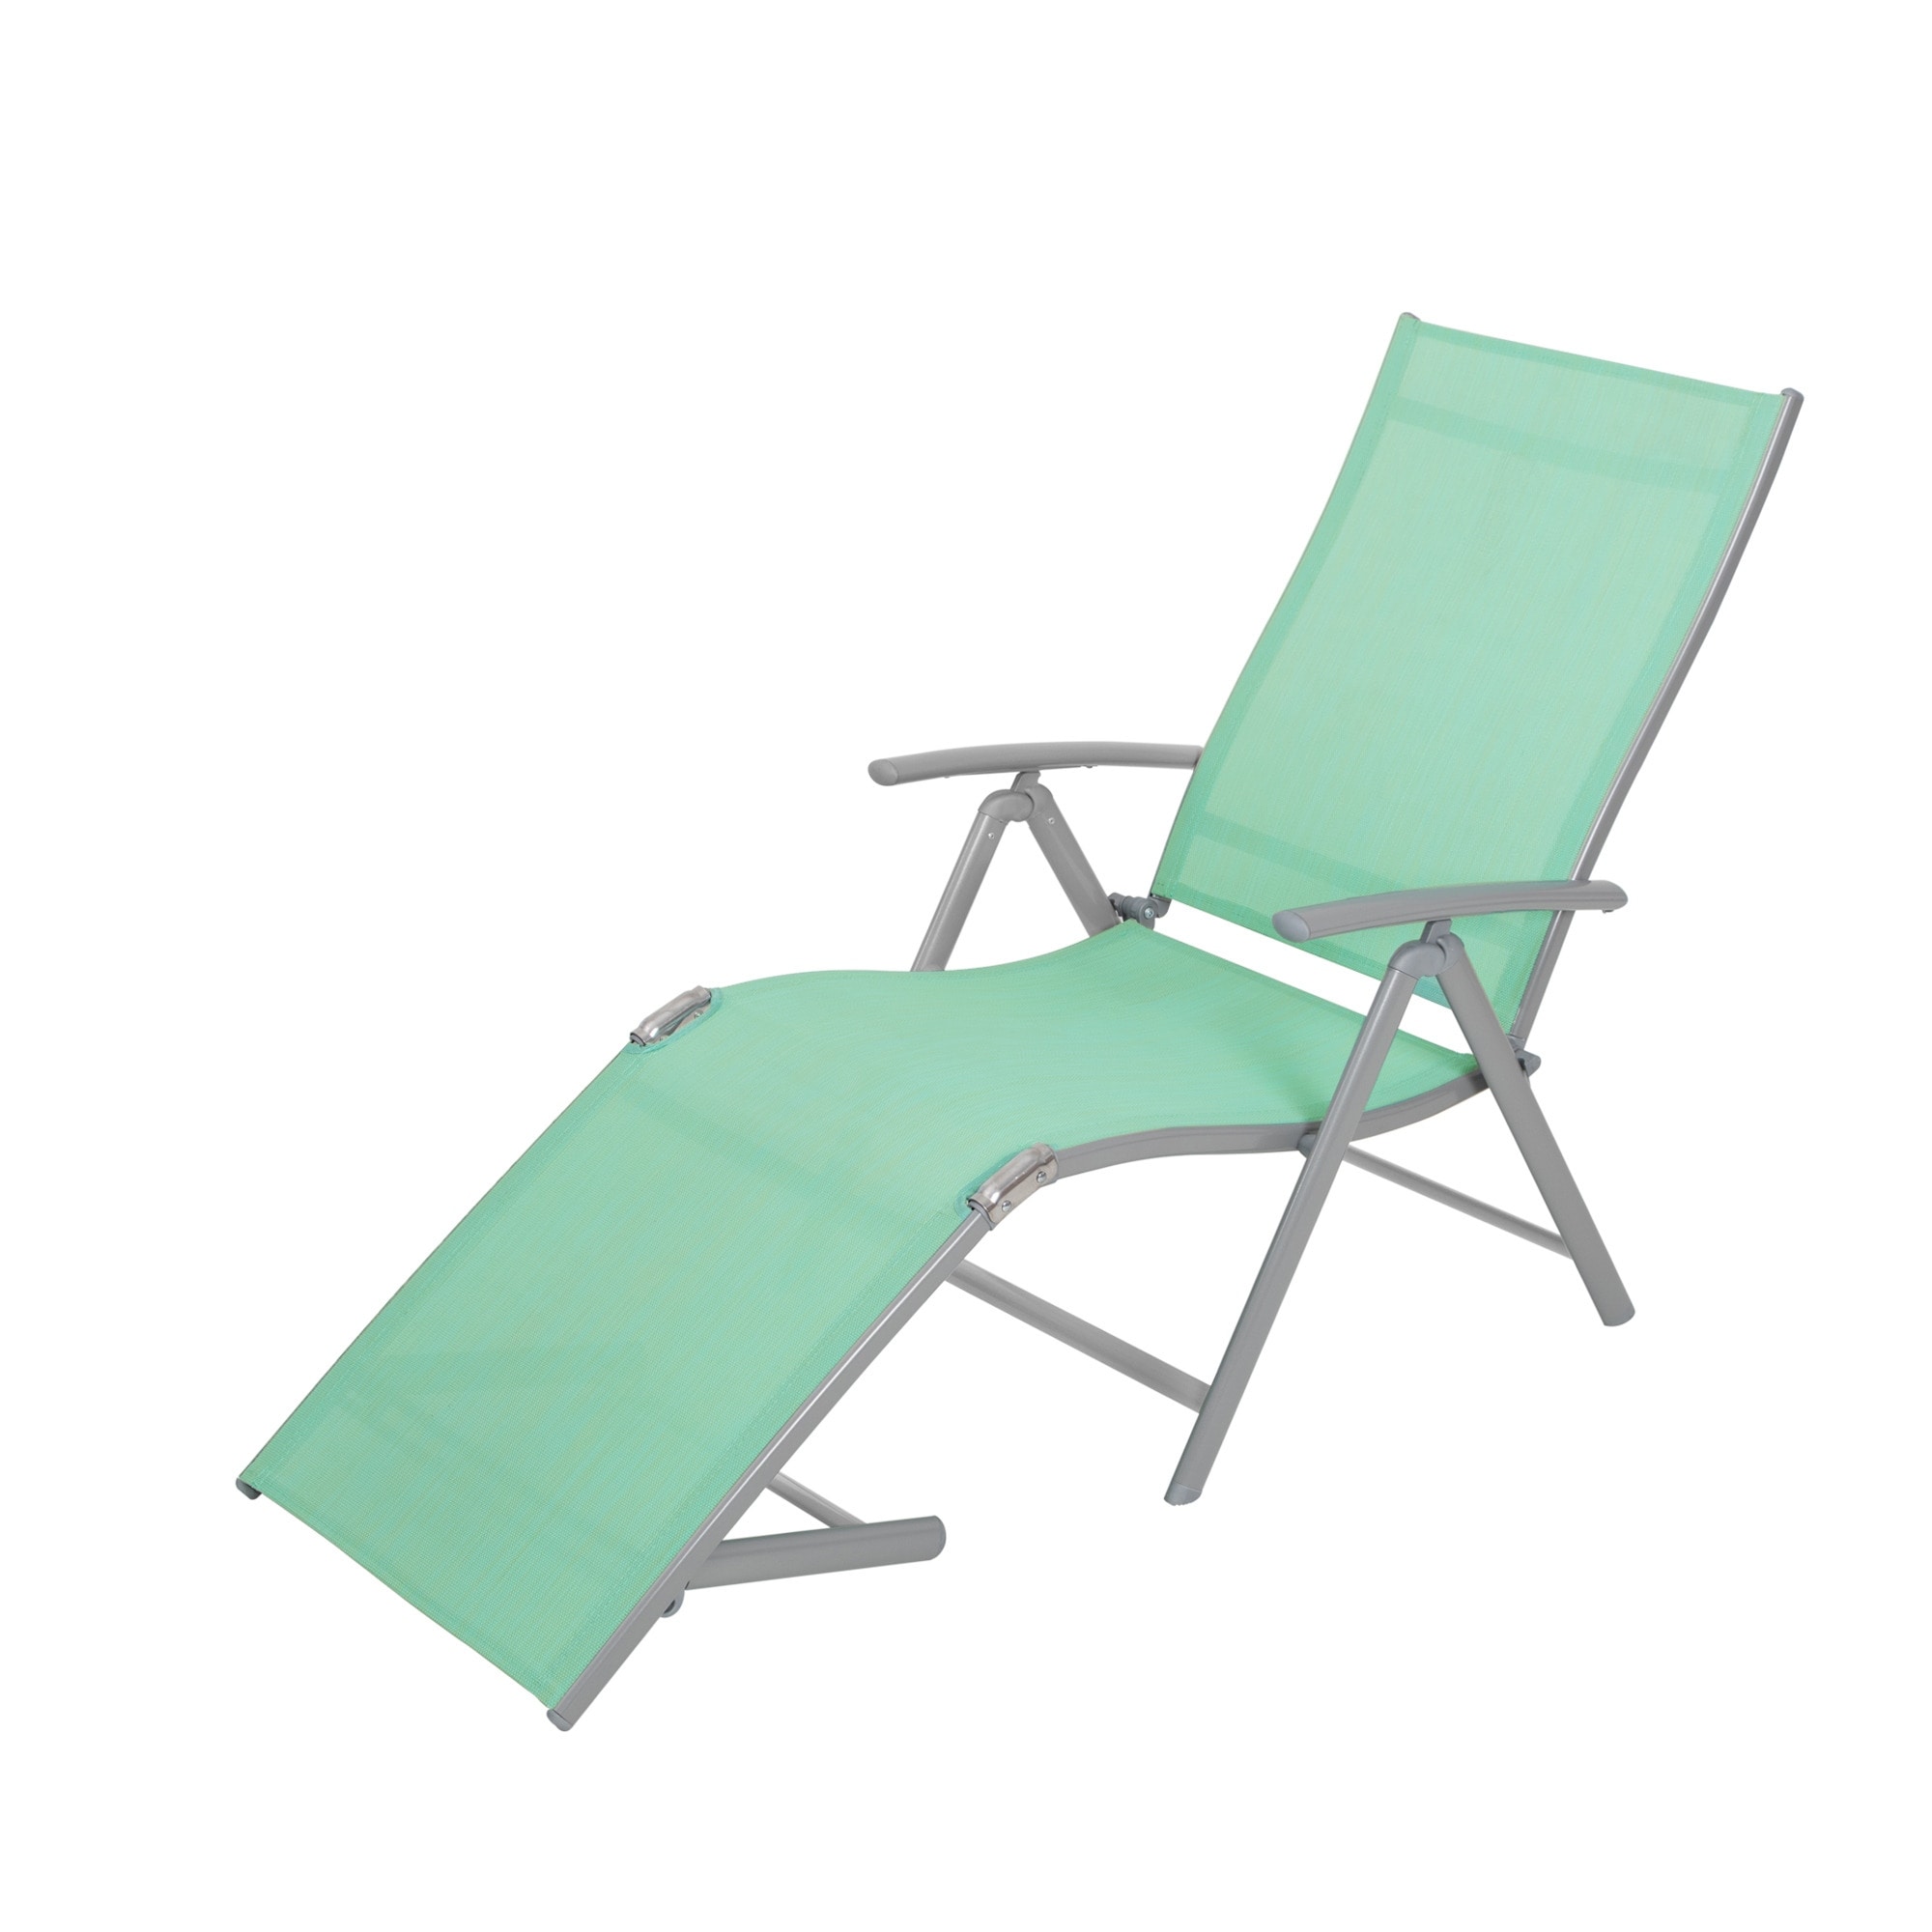 Outdoor Adjustable Aluminum Patio Folding Chaise Lounge Chair - 20w×45d×14h